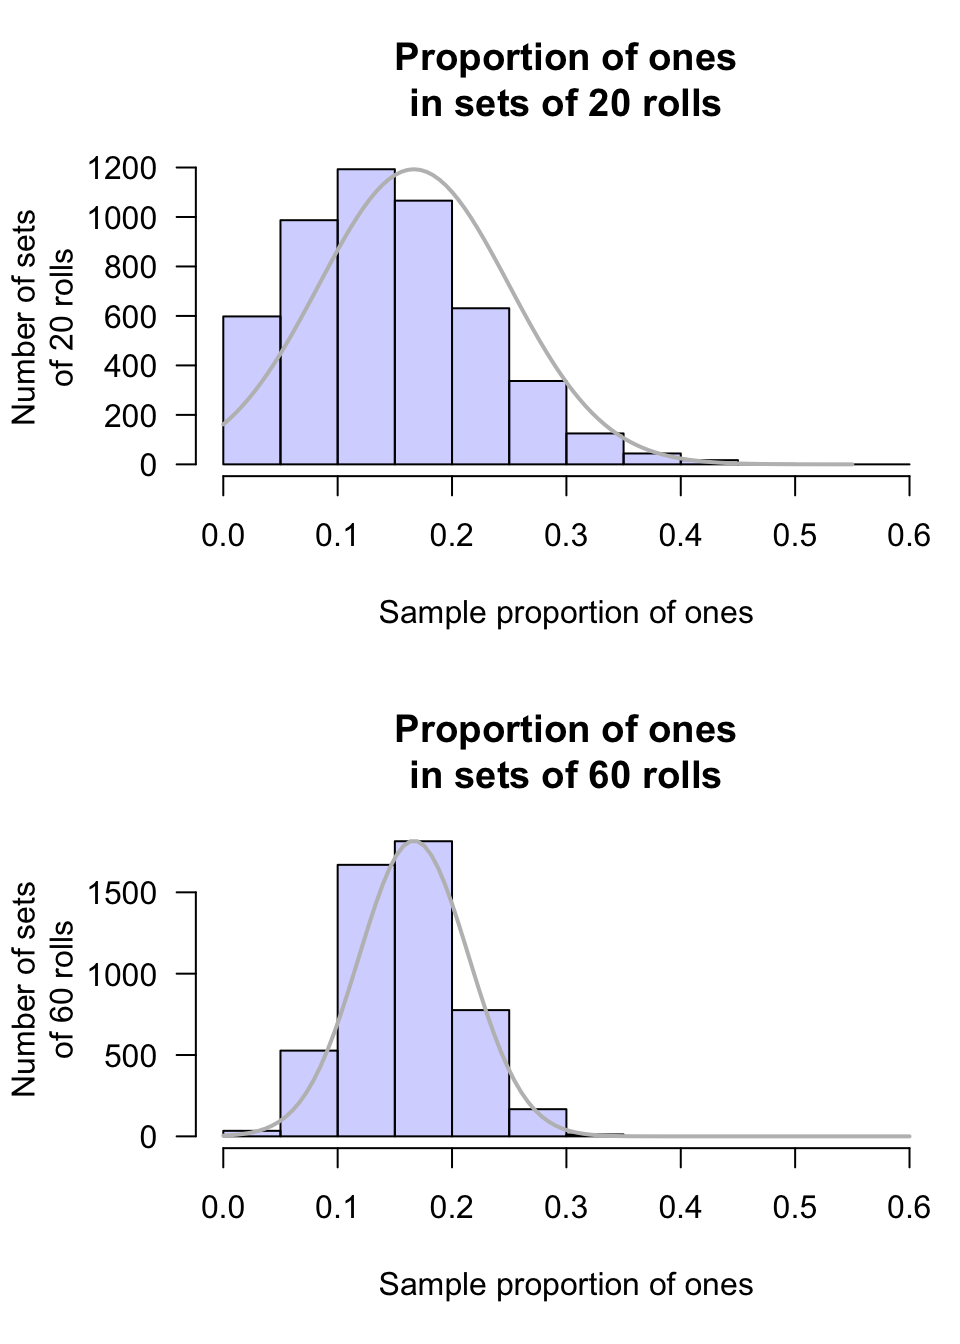 The sampling distribution of the proportion of ones rolled, for sets of 20 rolls (top panel) and sets of 60 rolls (bottom panel)